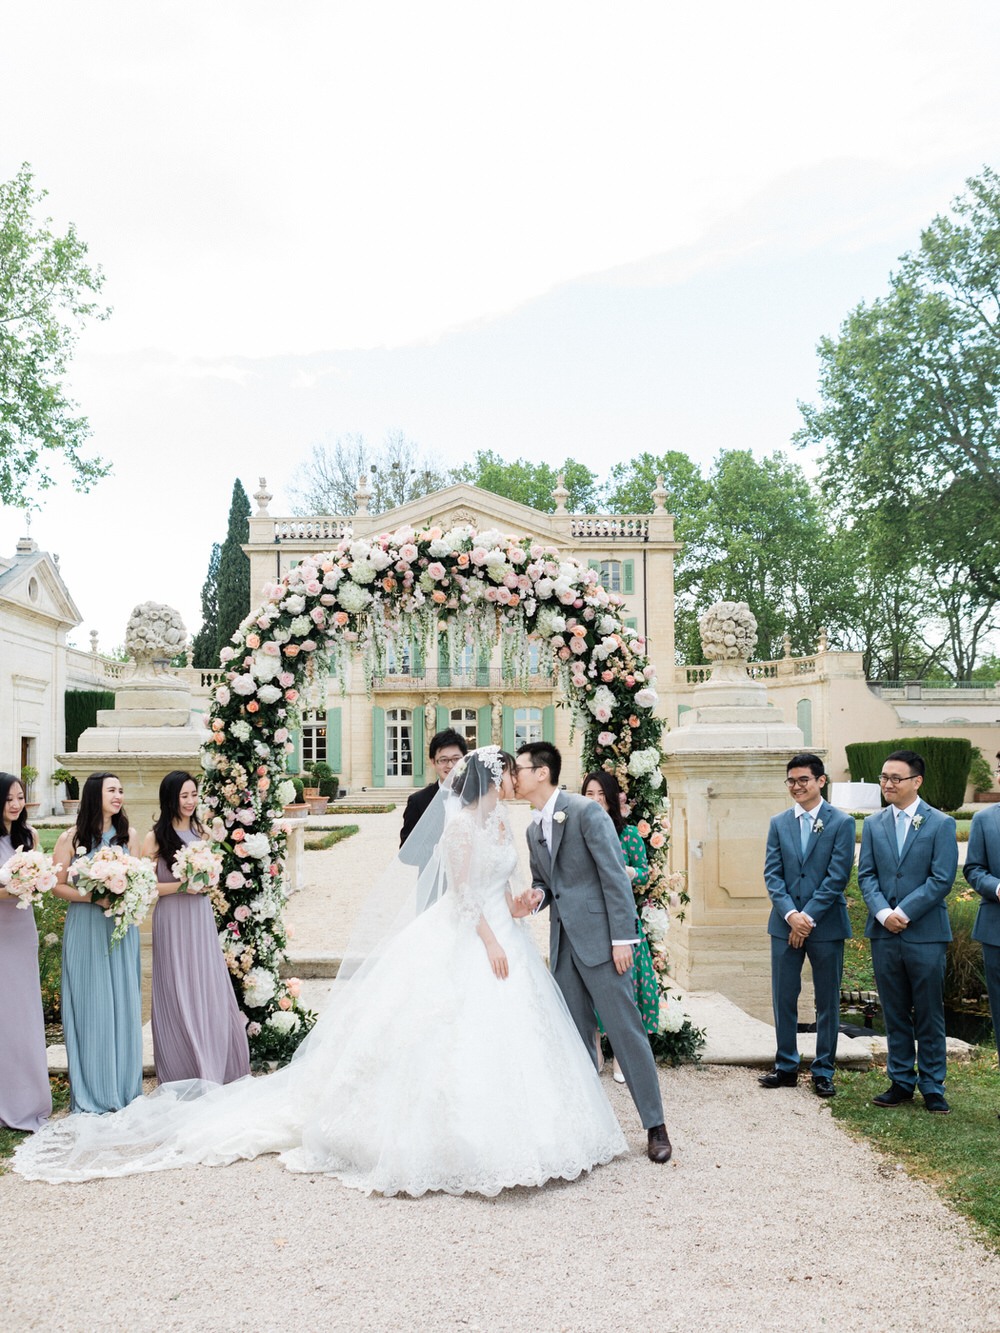 Romantic Provence Destination Wedding in a French Chateau ⋆ Ruffled